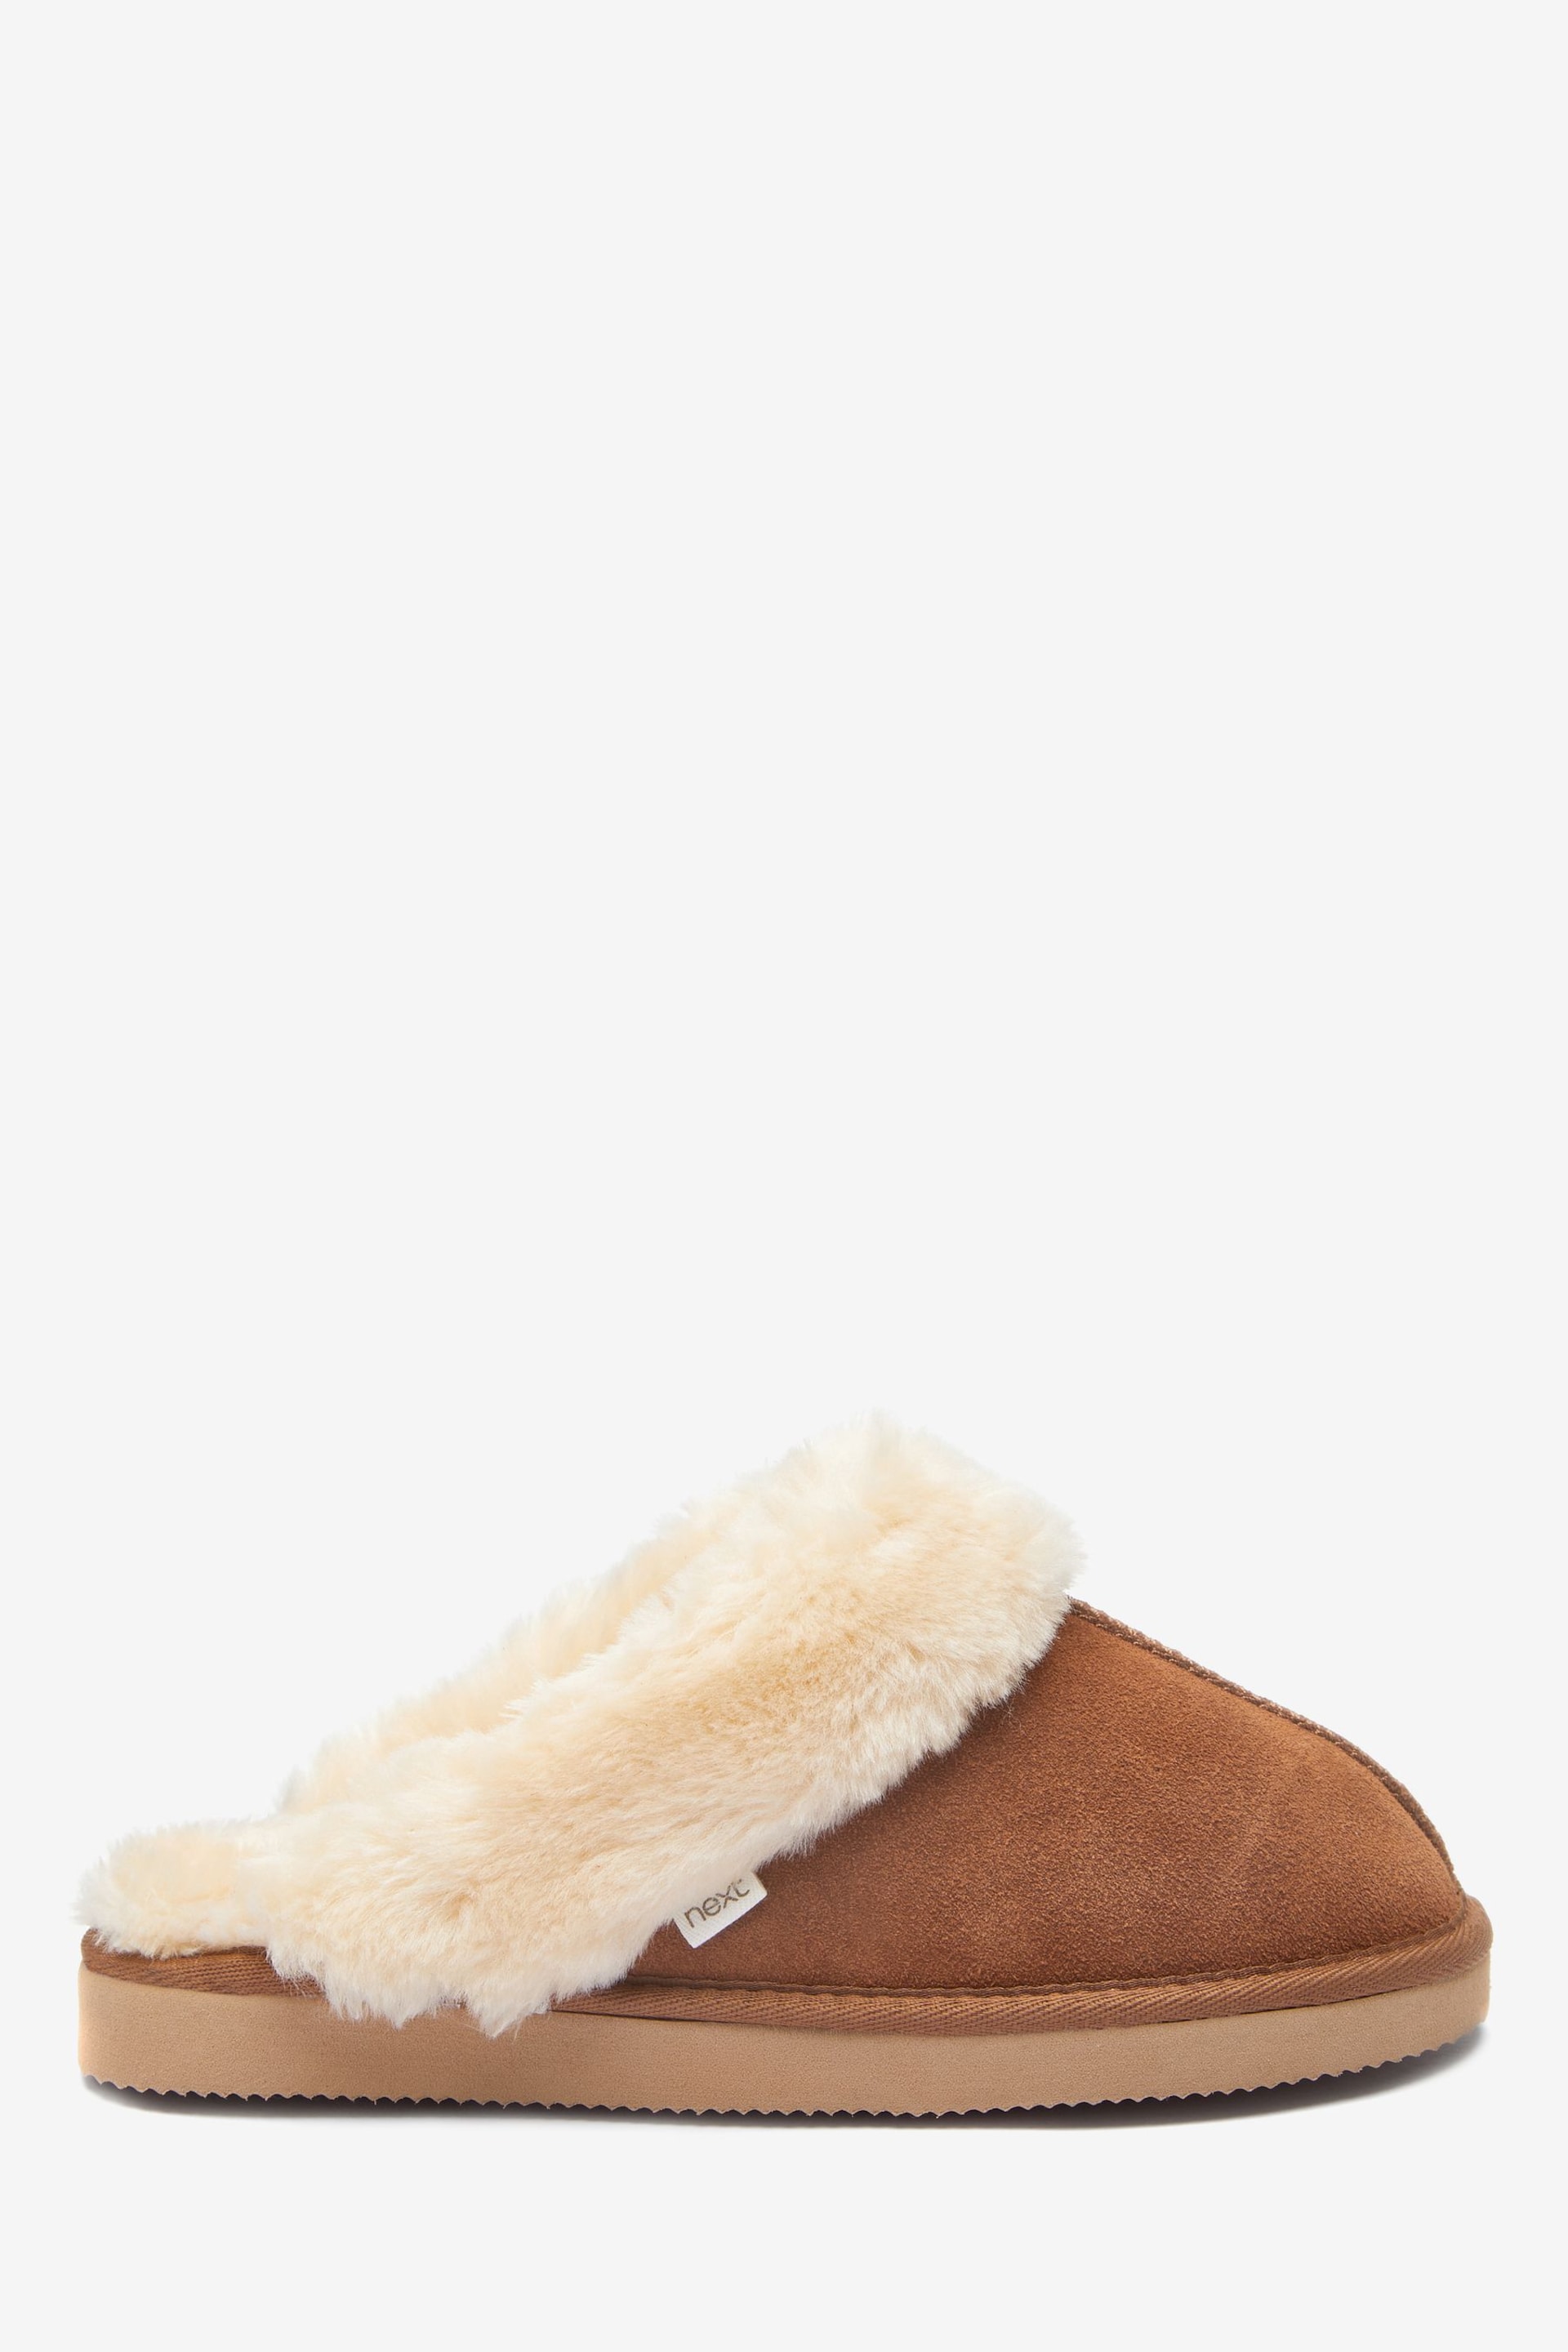 Chestnut Brown Suede Faux Fur Lined Mule Slippers - Image 1 of 4